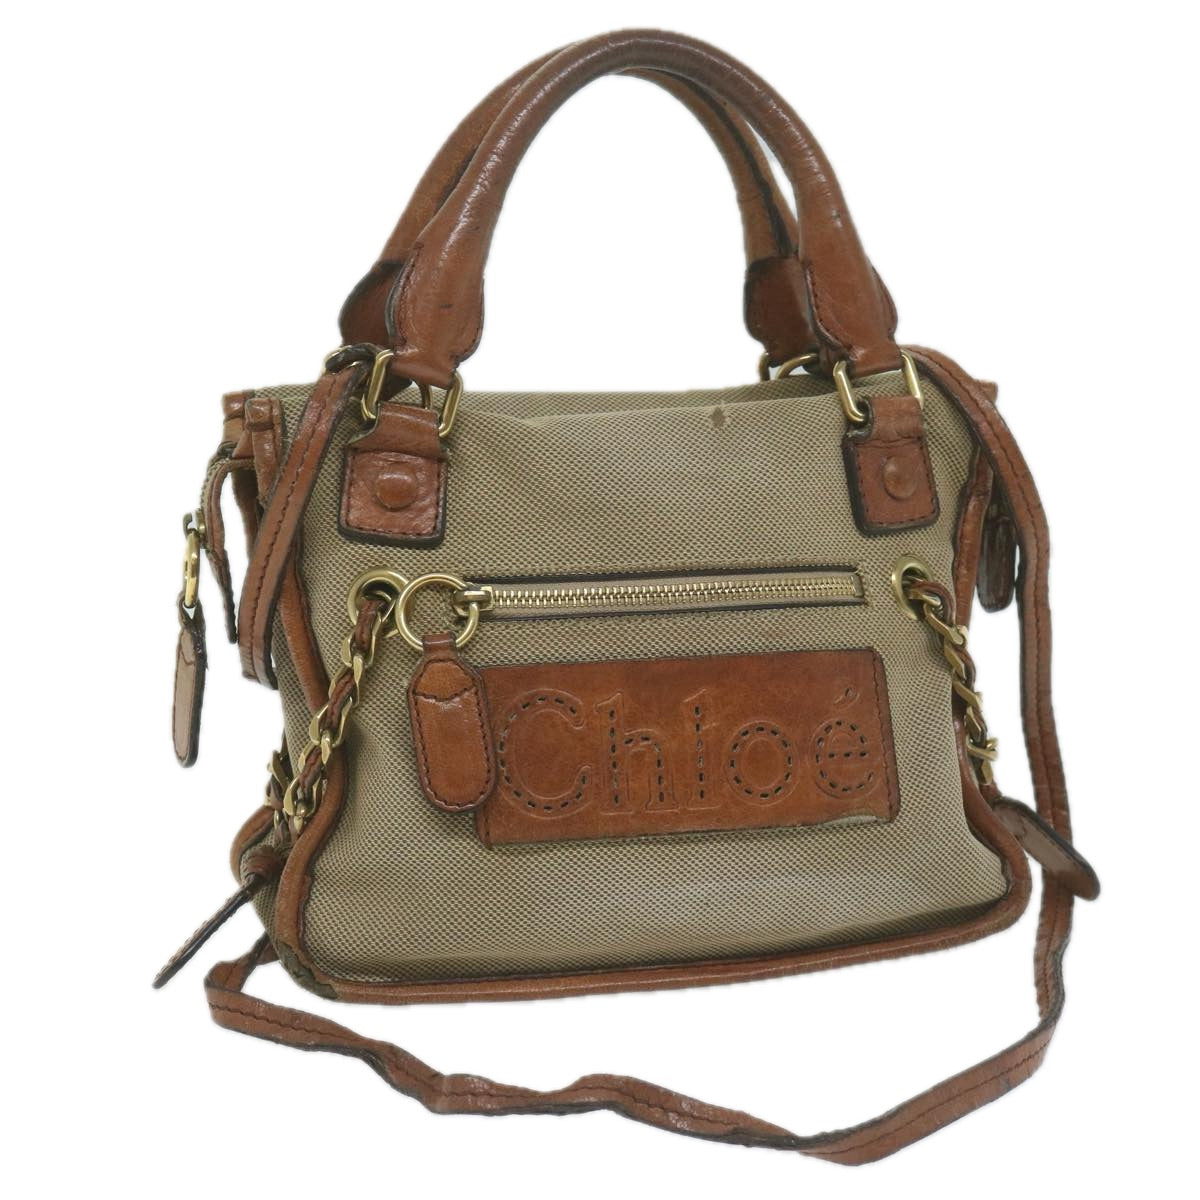 Chloe Harley Hand Bag Canvas Leather 2way Beige Auth bs11776